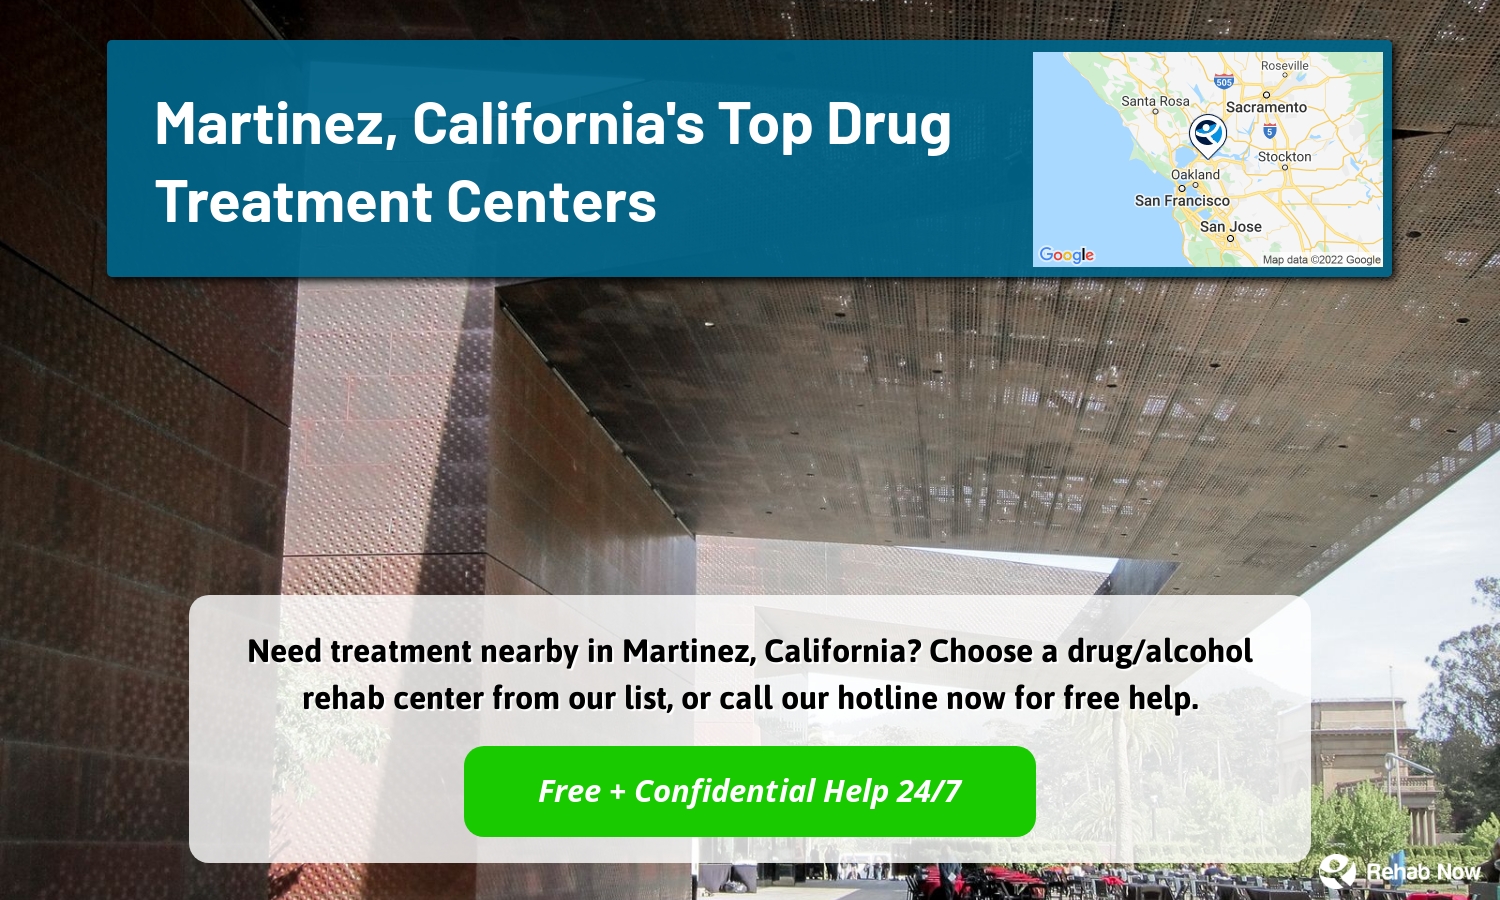 Need treatment nearby in Martinez, California? Choose a drug/alcohol rehab center from our list, or call our hotline now for free help.